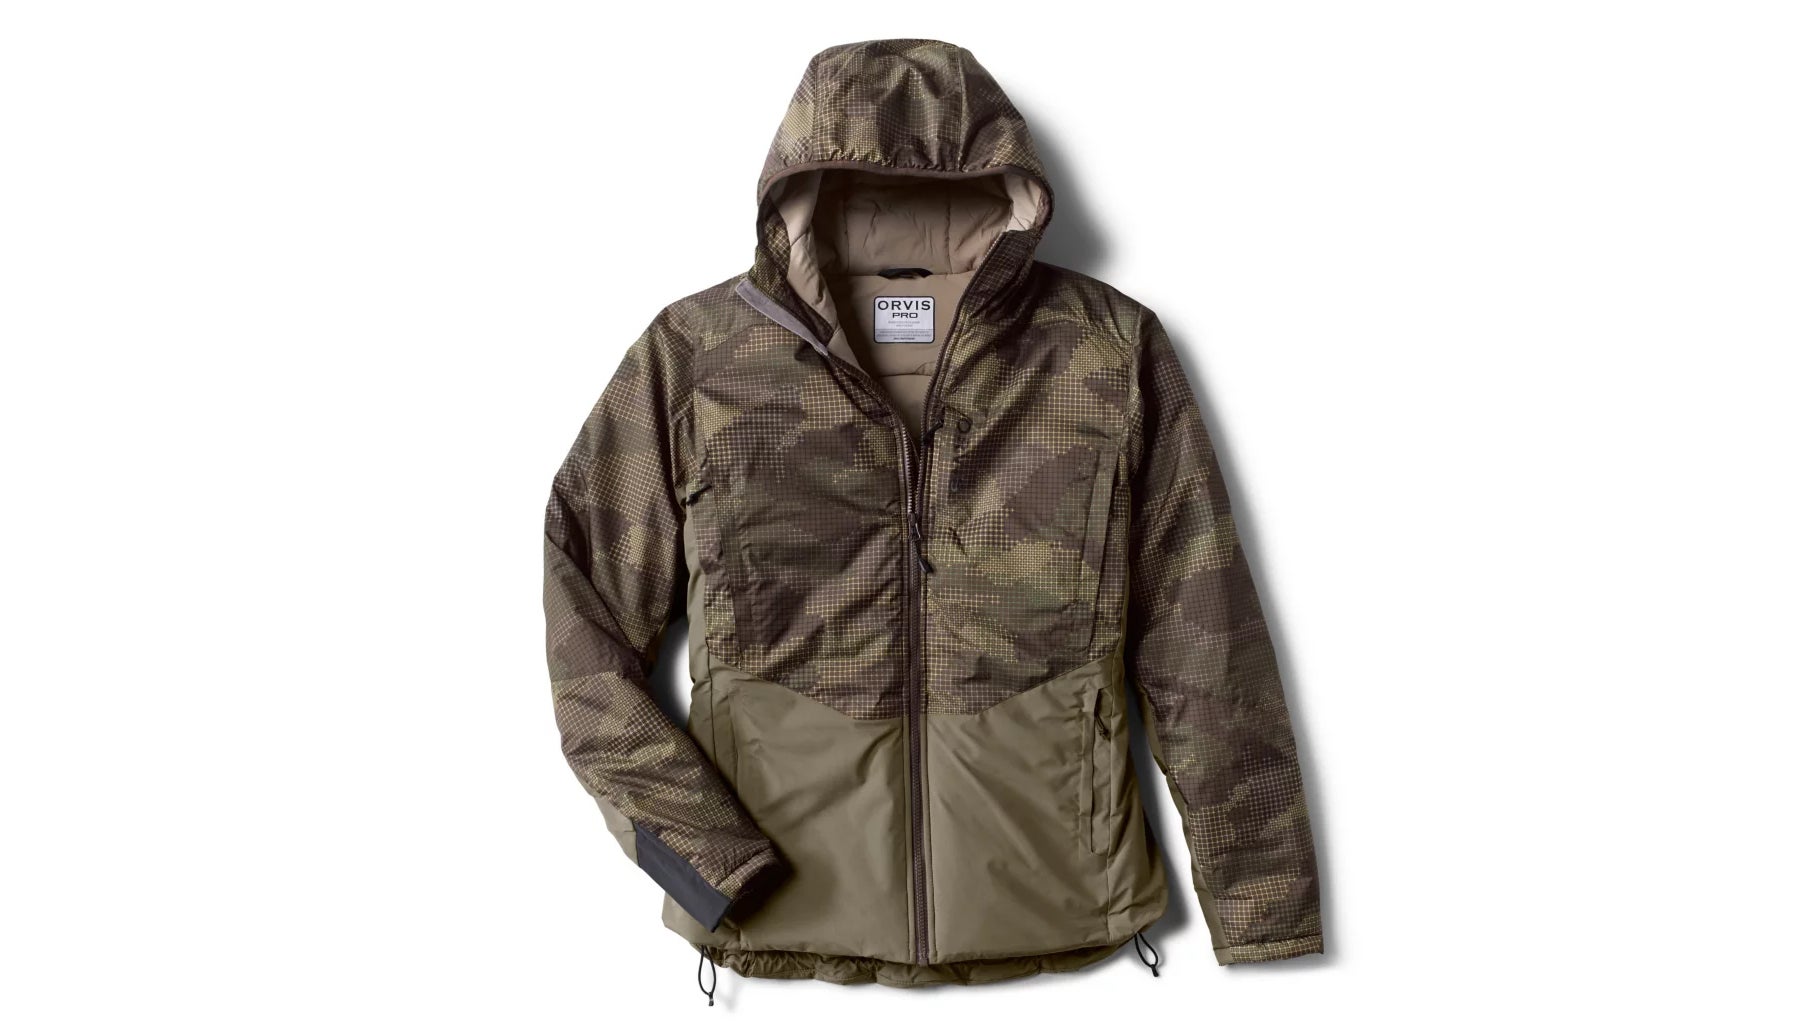 Orvis Men's PRO LT Insulated Hoodie, Orvis Fly Fishing Gear, Buy At